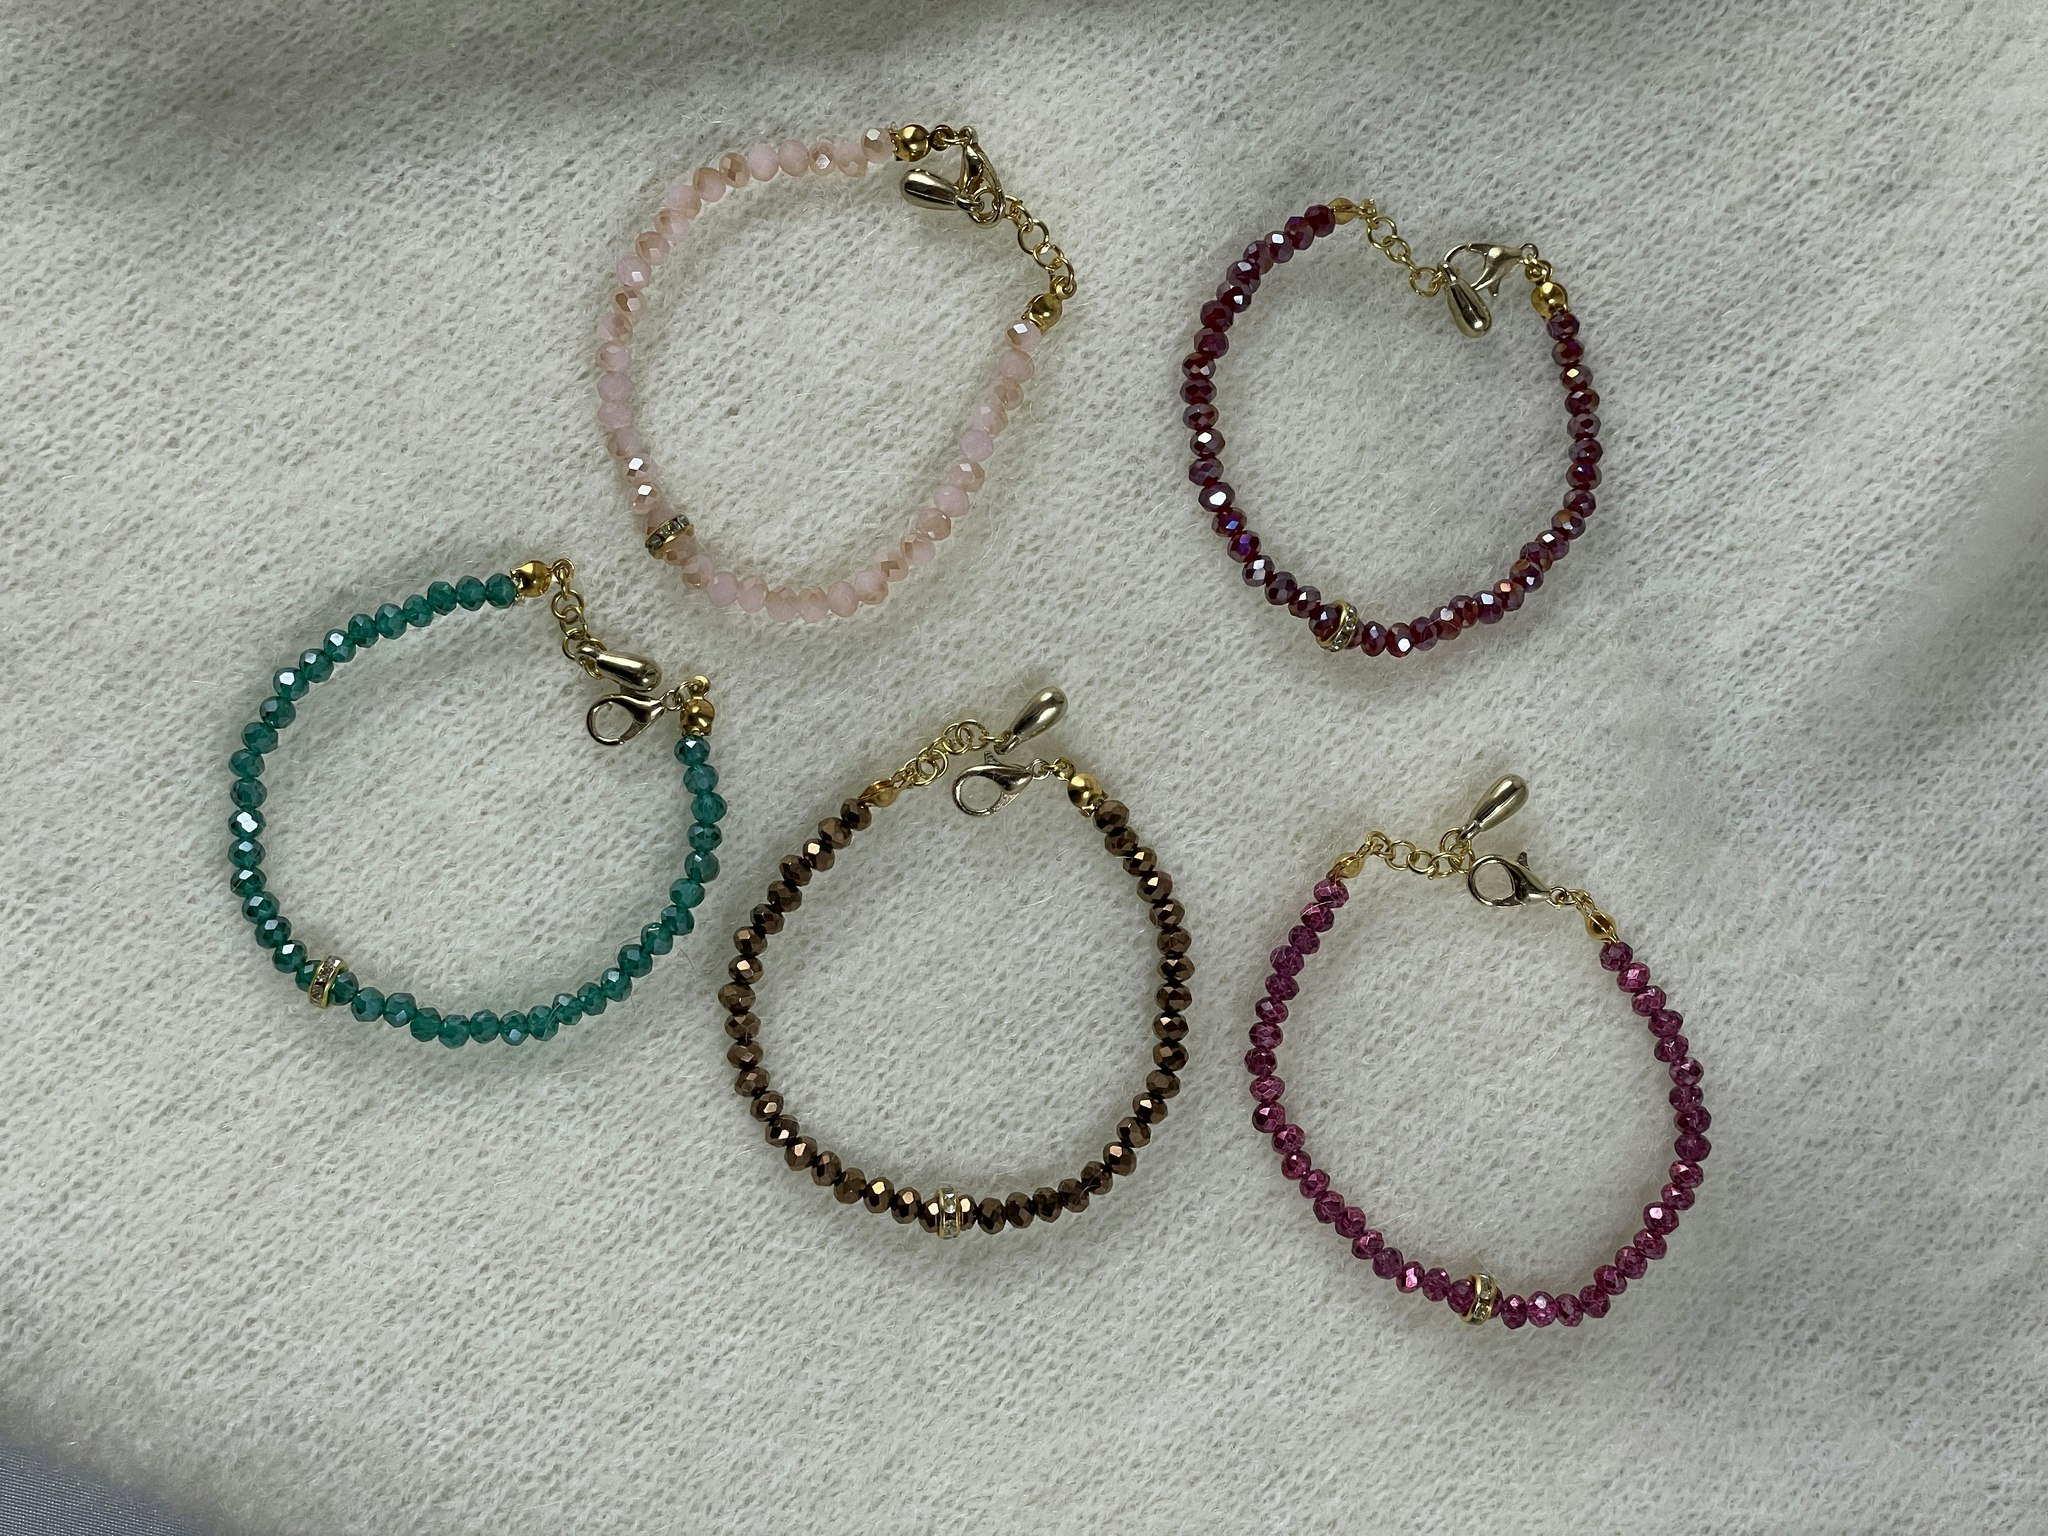 Bracelets in different colors